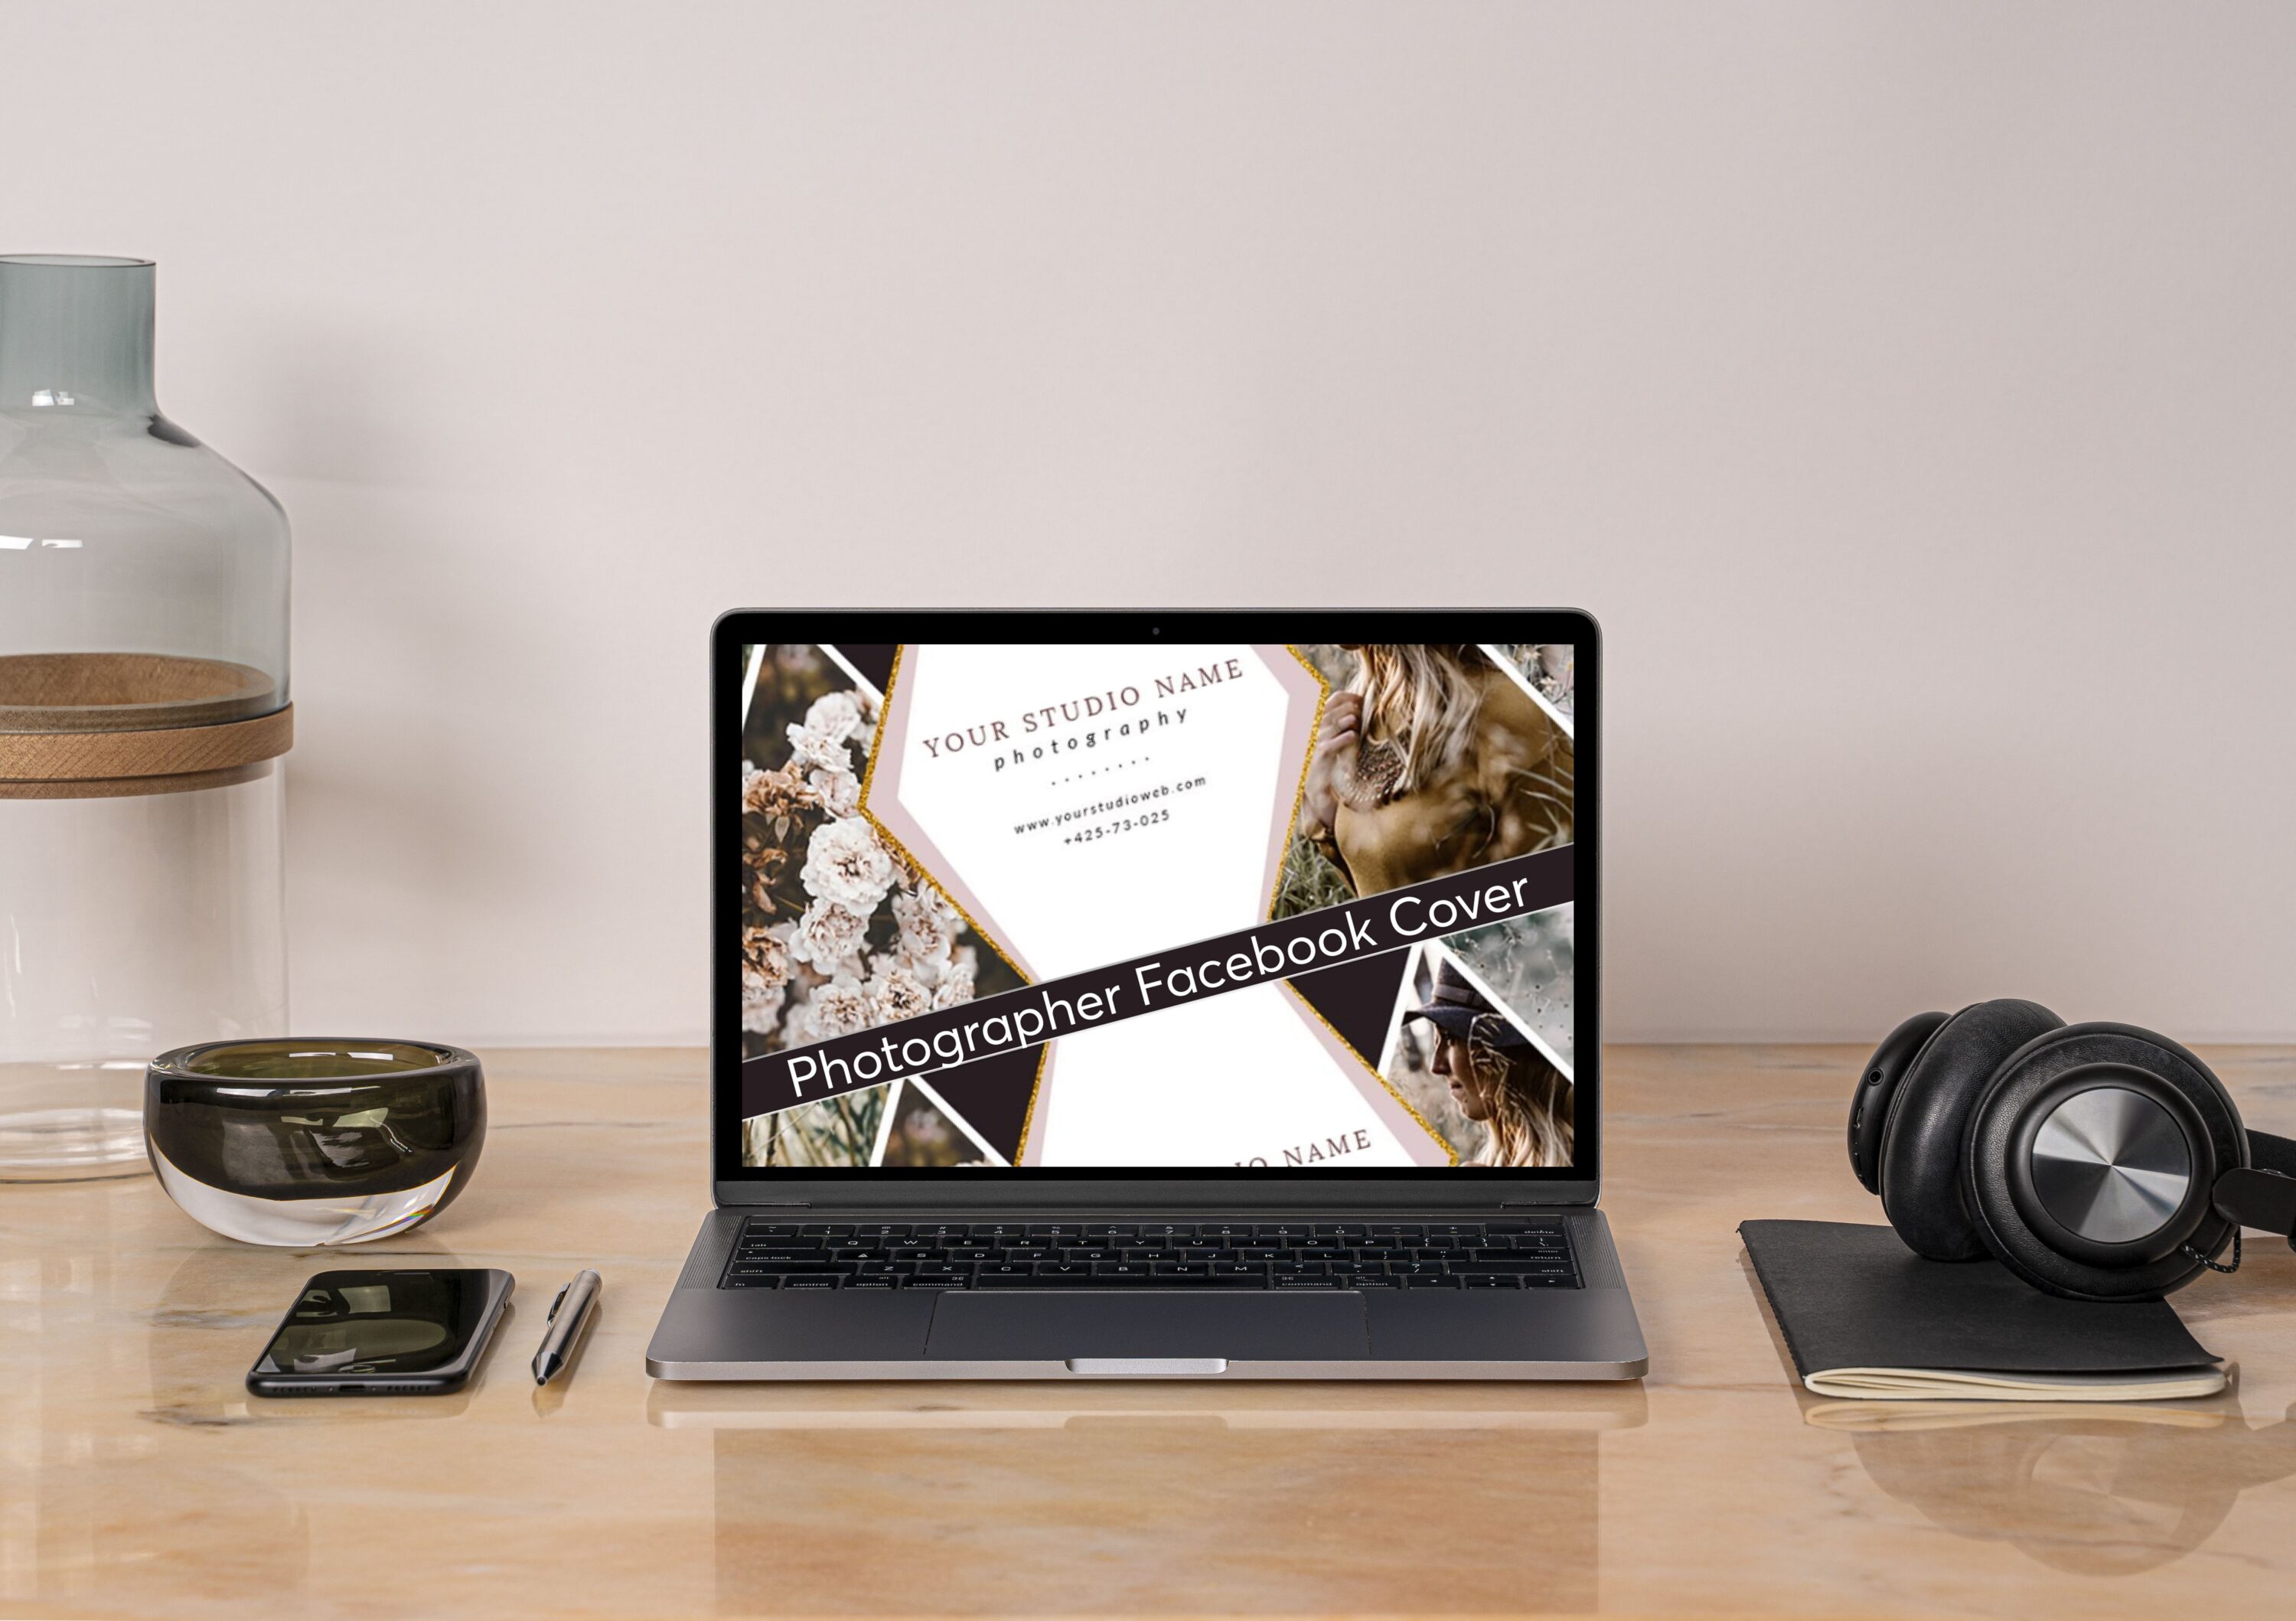 Laptop option of the Photographer Facebook Cover.